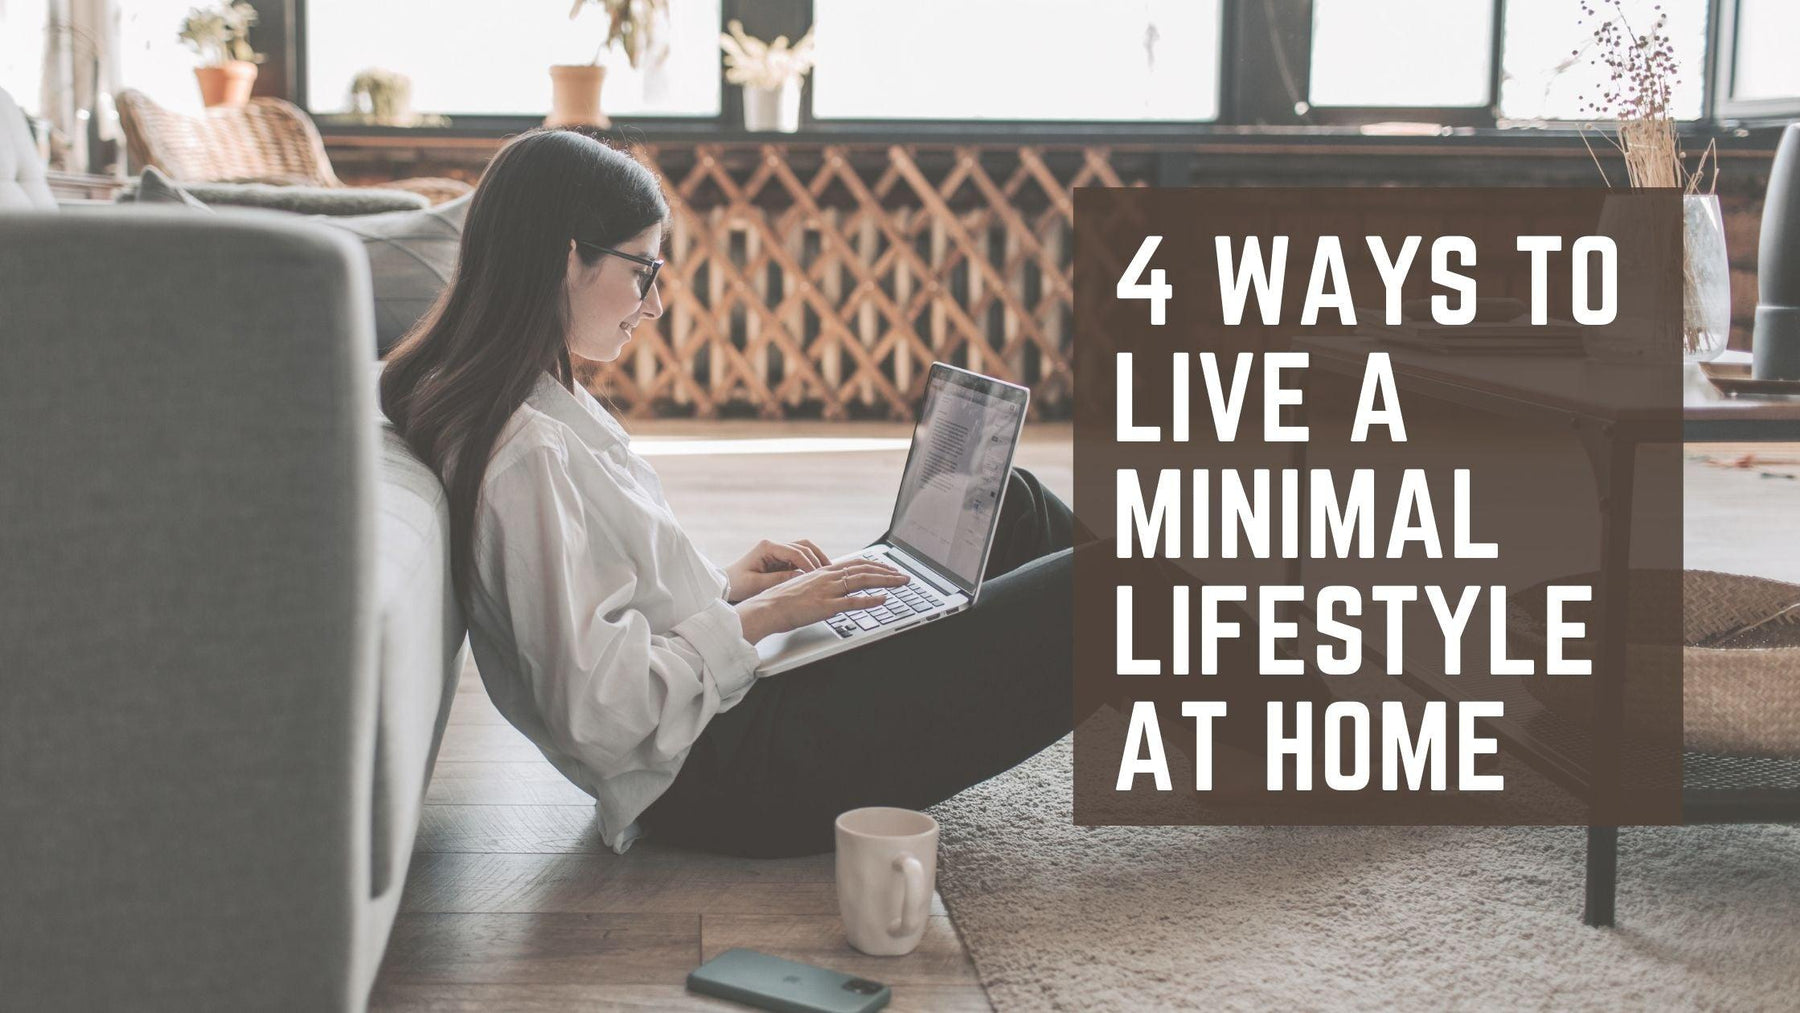 4 Ways To Live A Minimal Lifestyle At Home - WoodenTwist